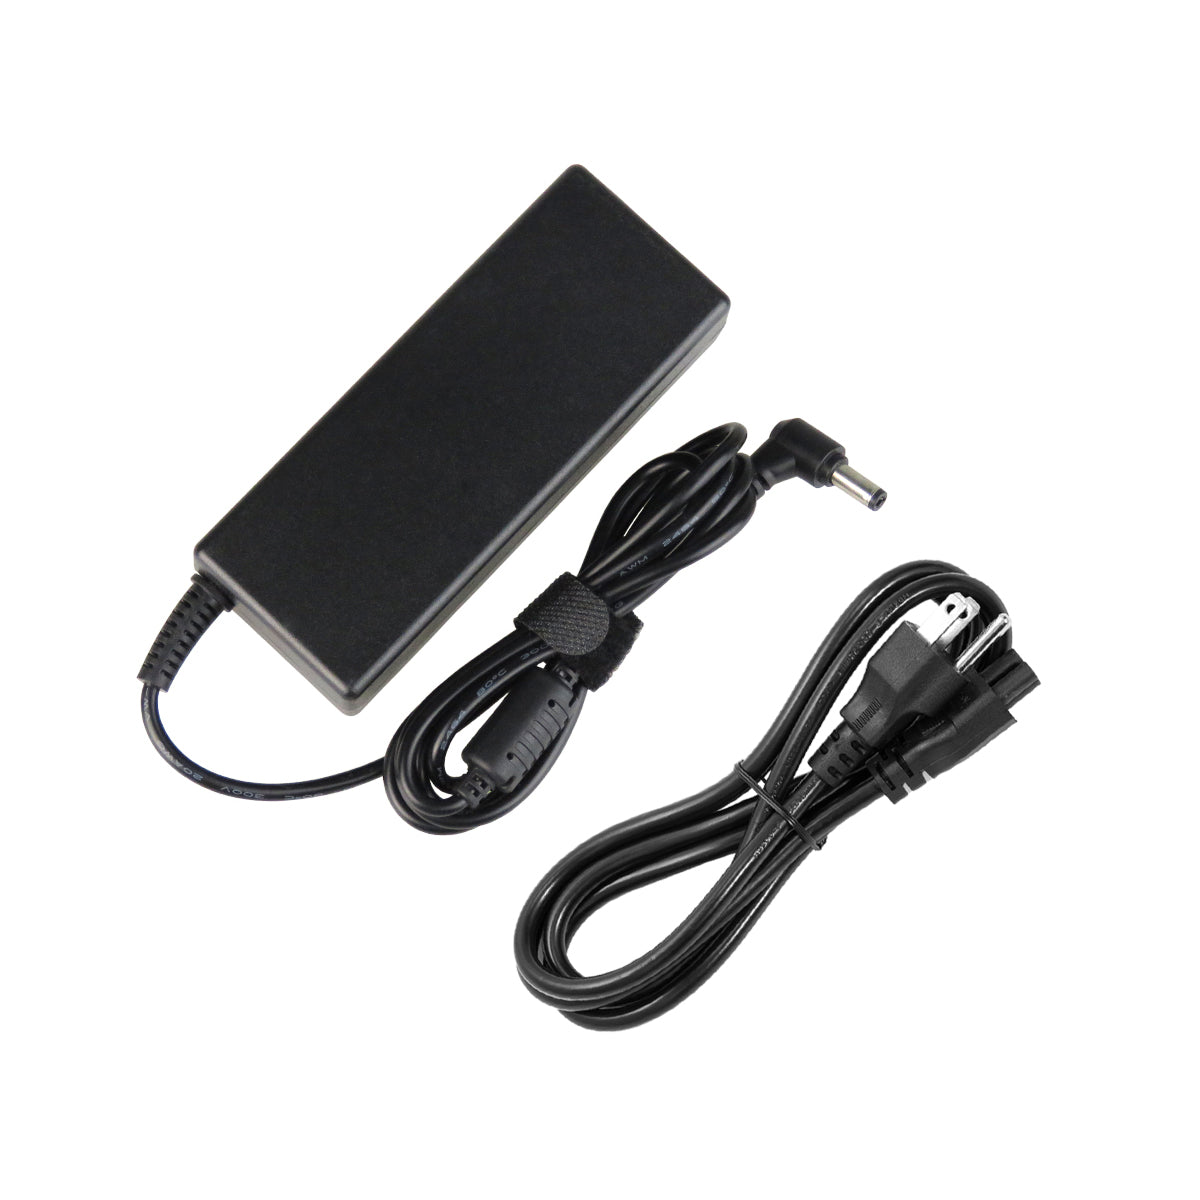 AC Adapter Charger for ASUS X54L-BBK2 Notebook.